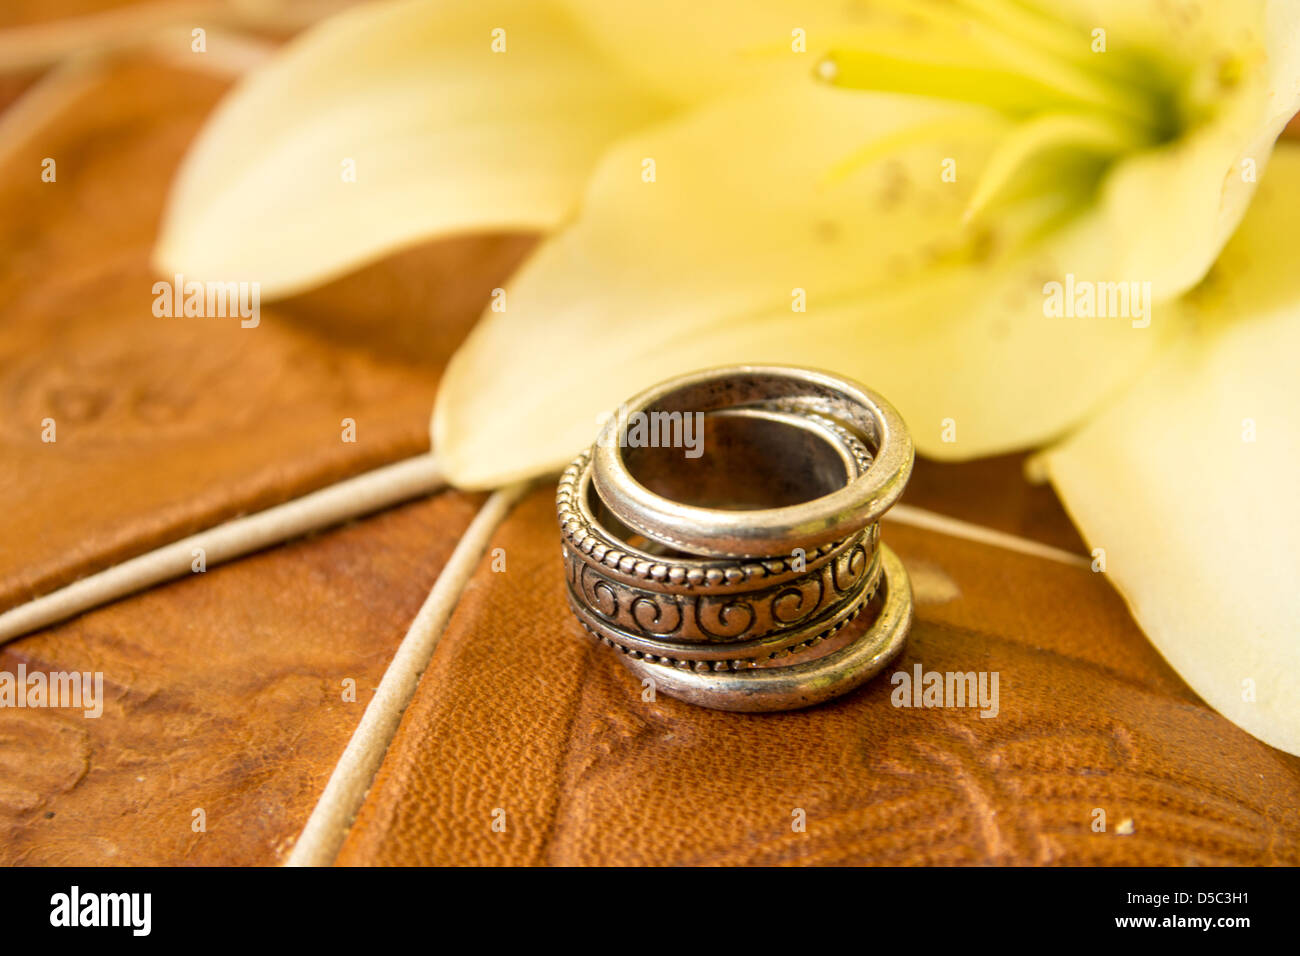 Handmade jewelry from Nepal on leather close up Stock Photo